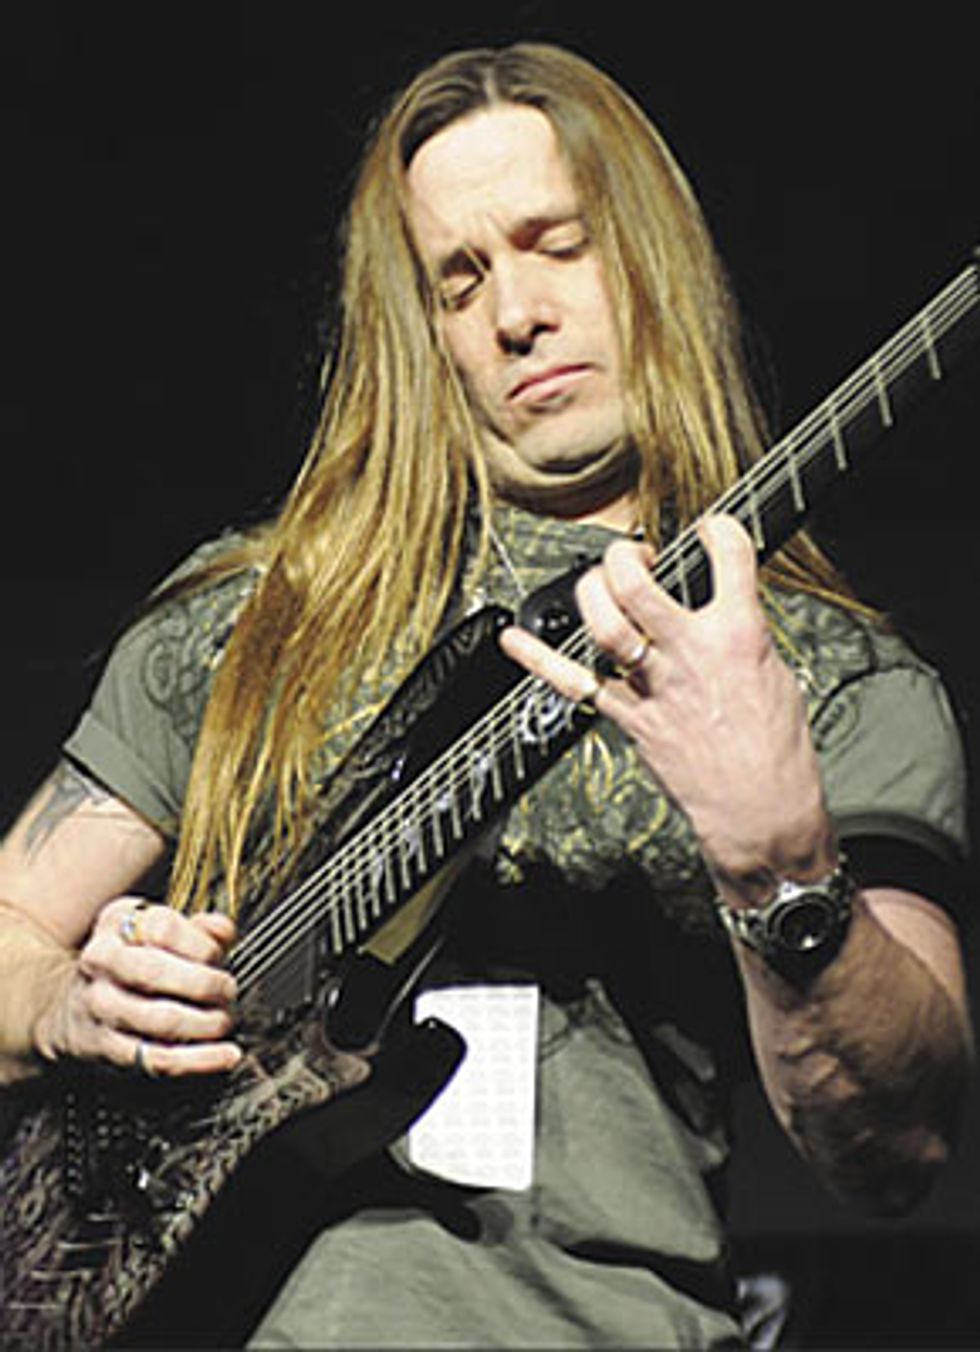 http://www.premierguitar.com/issue/features/images/200803_cooley_1.jpg